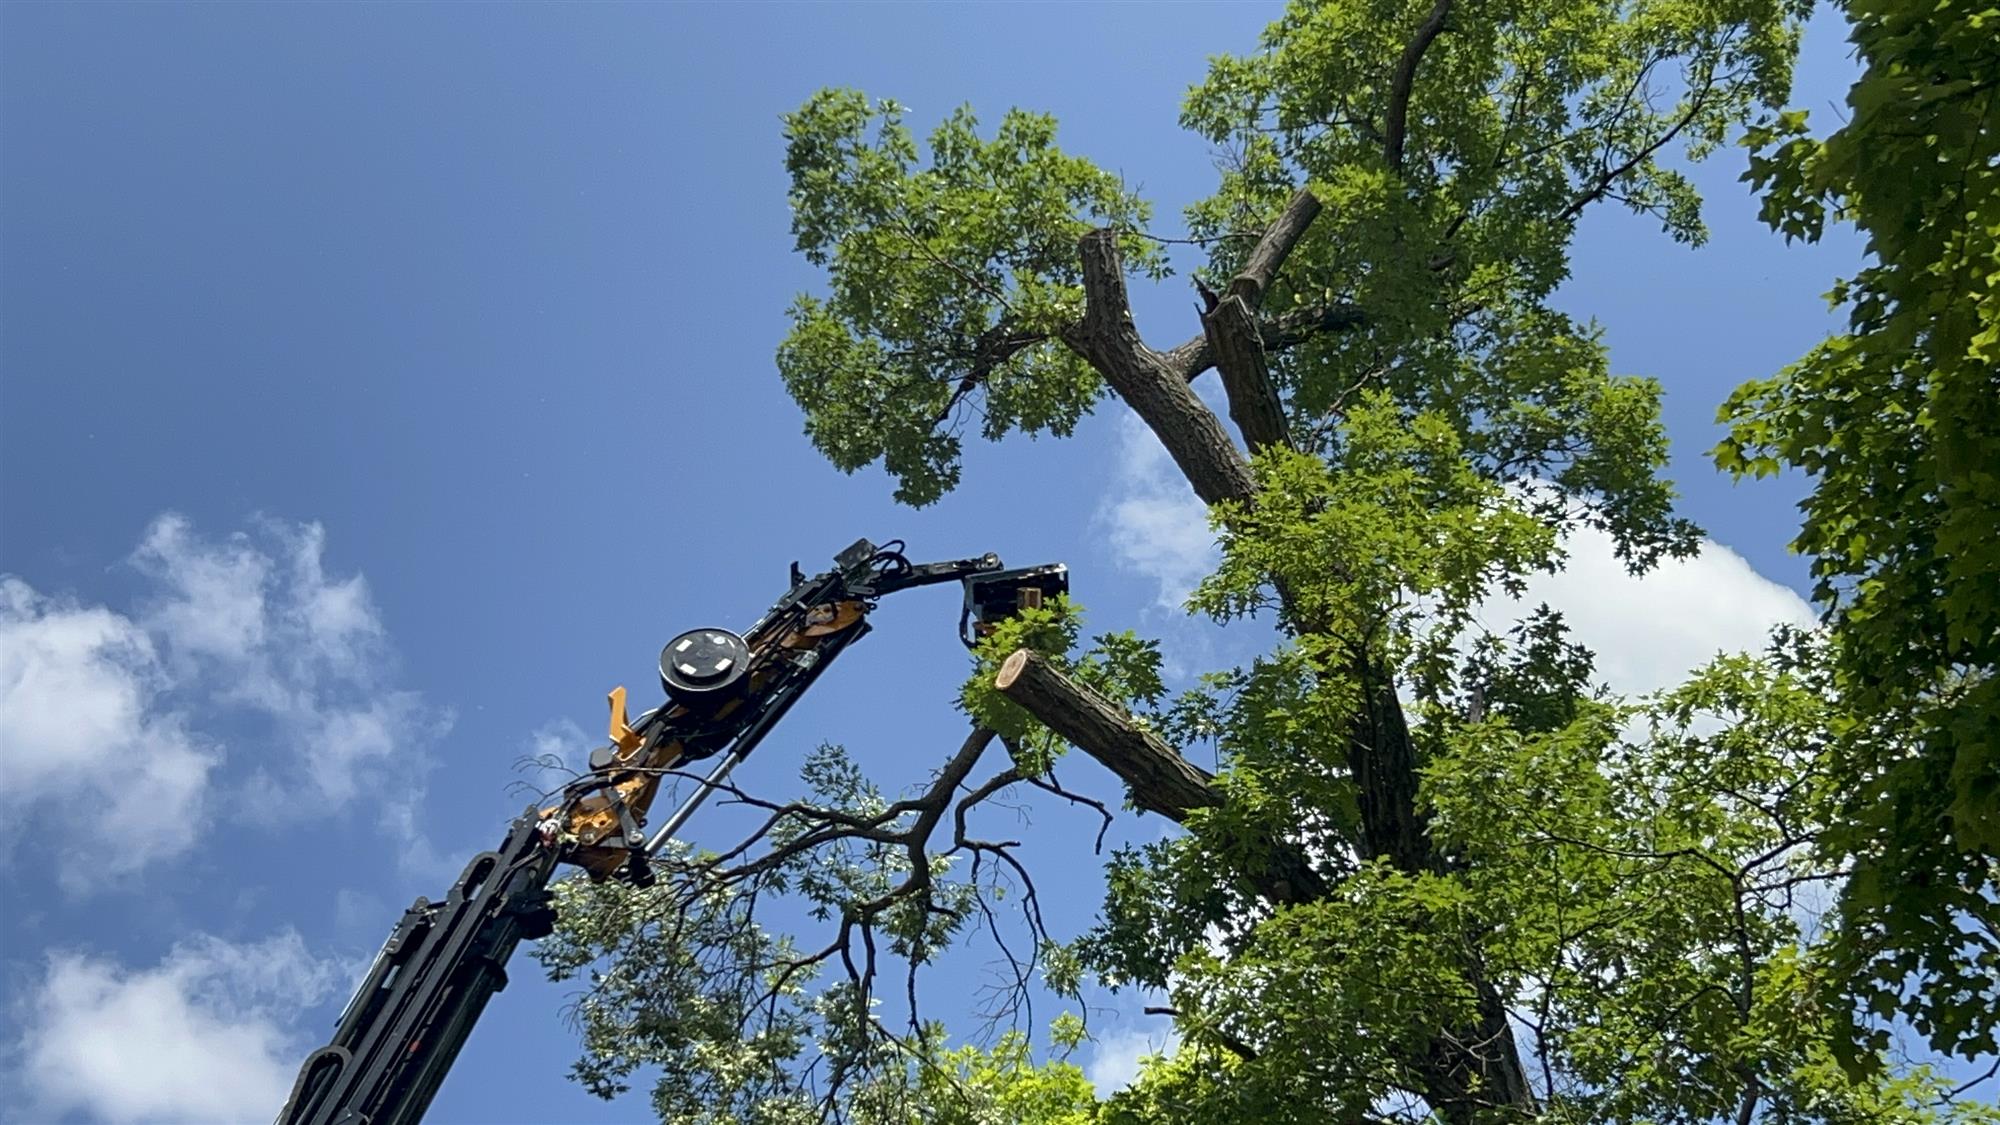 crane operated tree removal for SE Wisconsin public parks